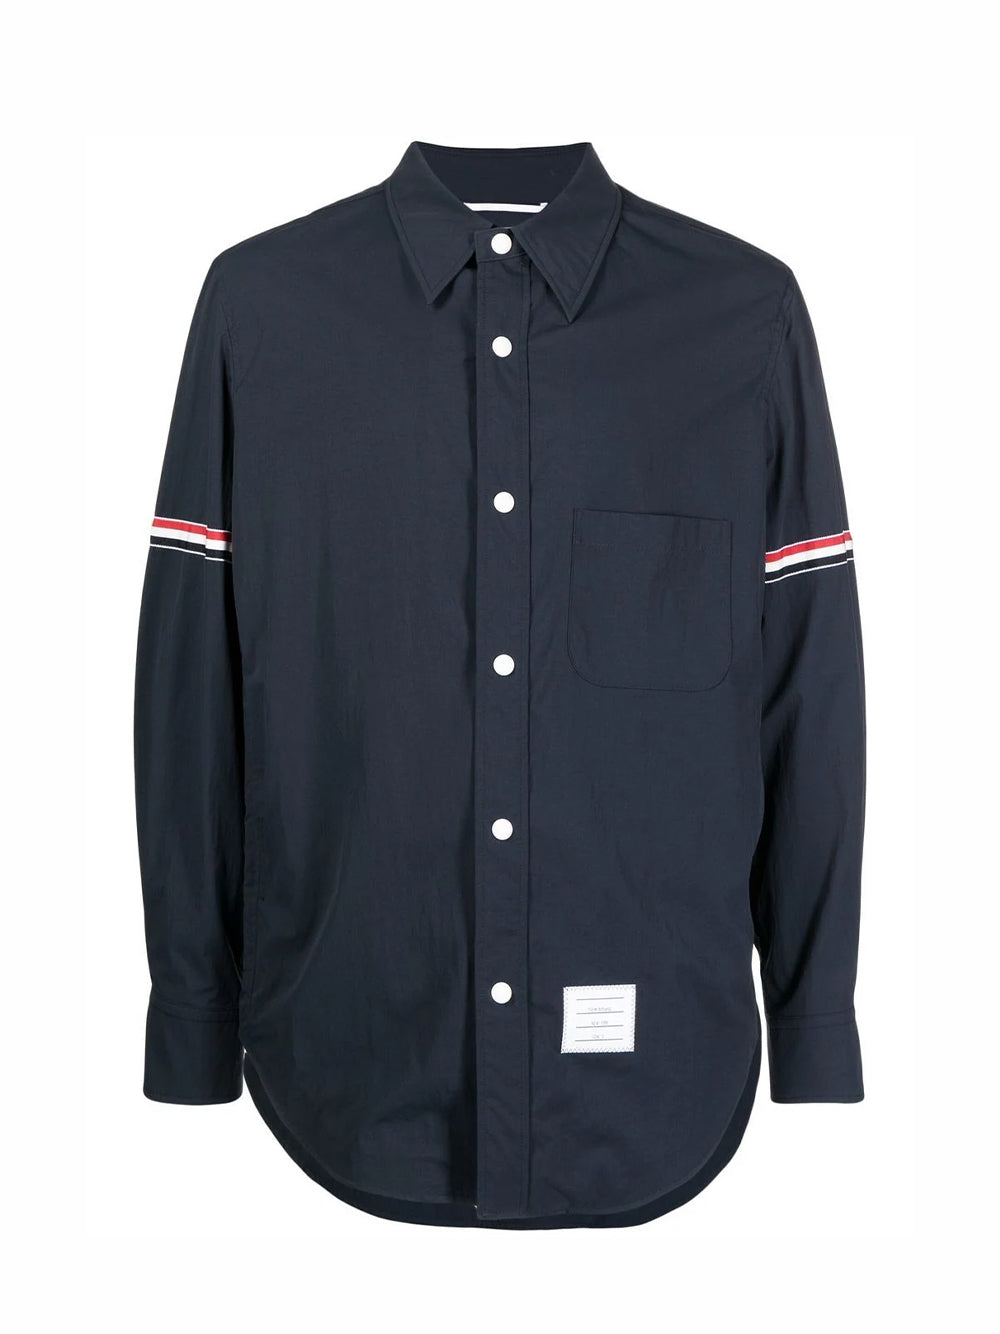 Snap Front Shirt Jacket W/ Rwb Grosgrain Armbands In Solid Nylon Shell (Navy)